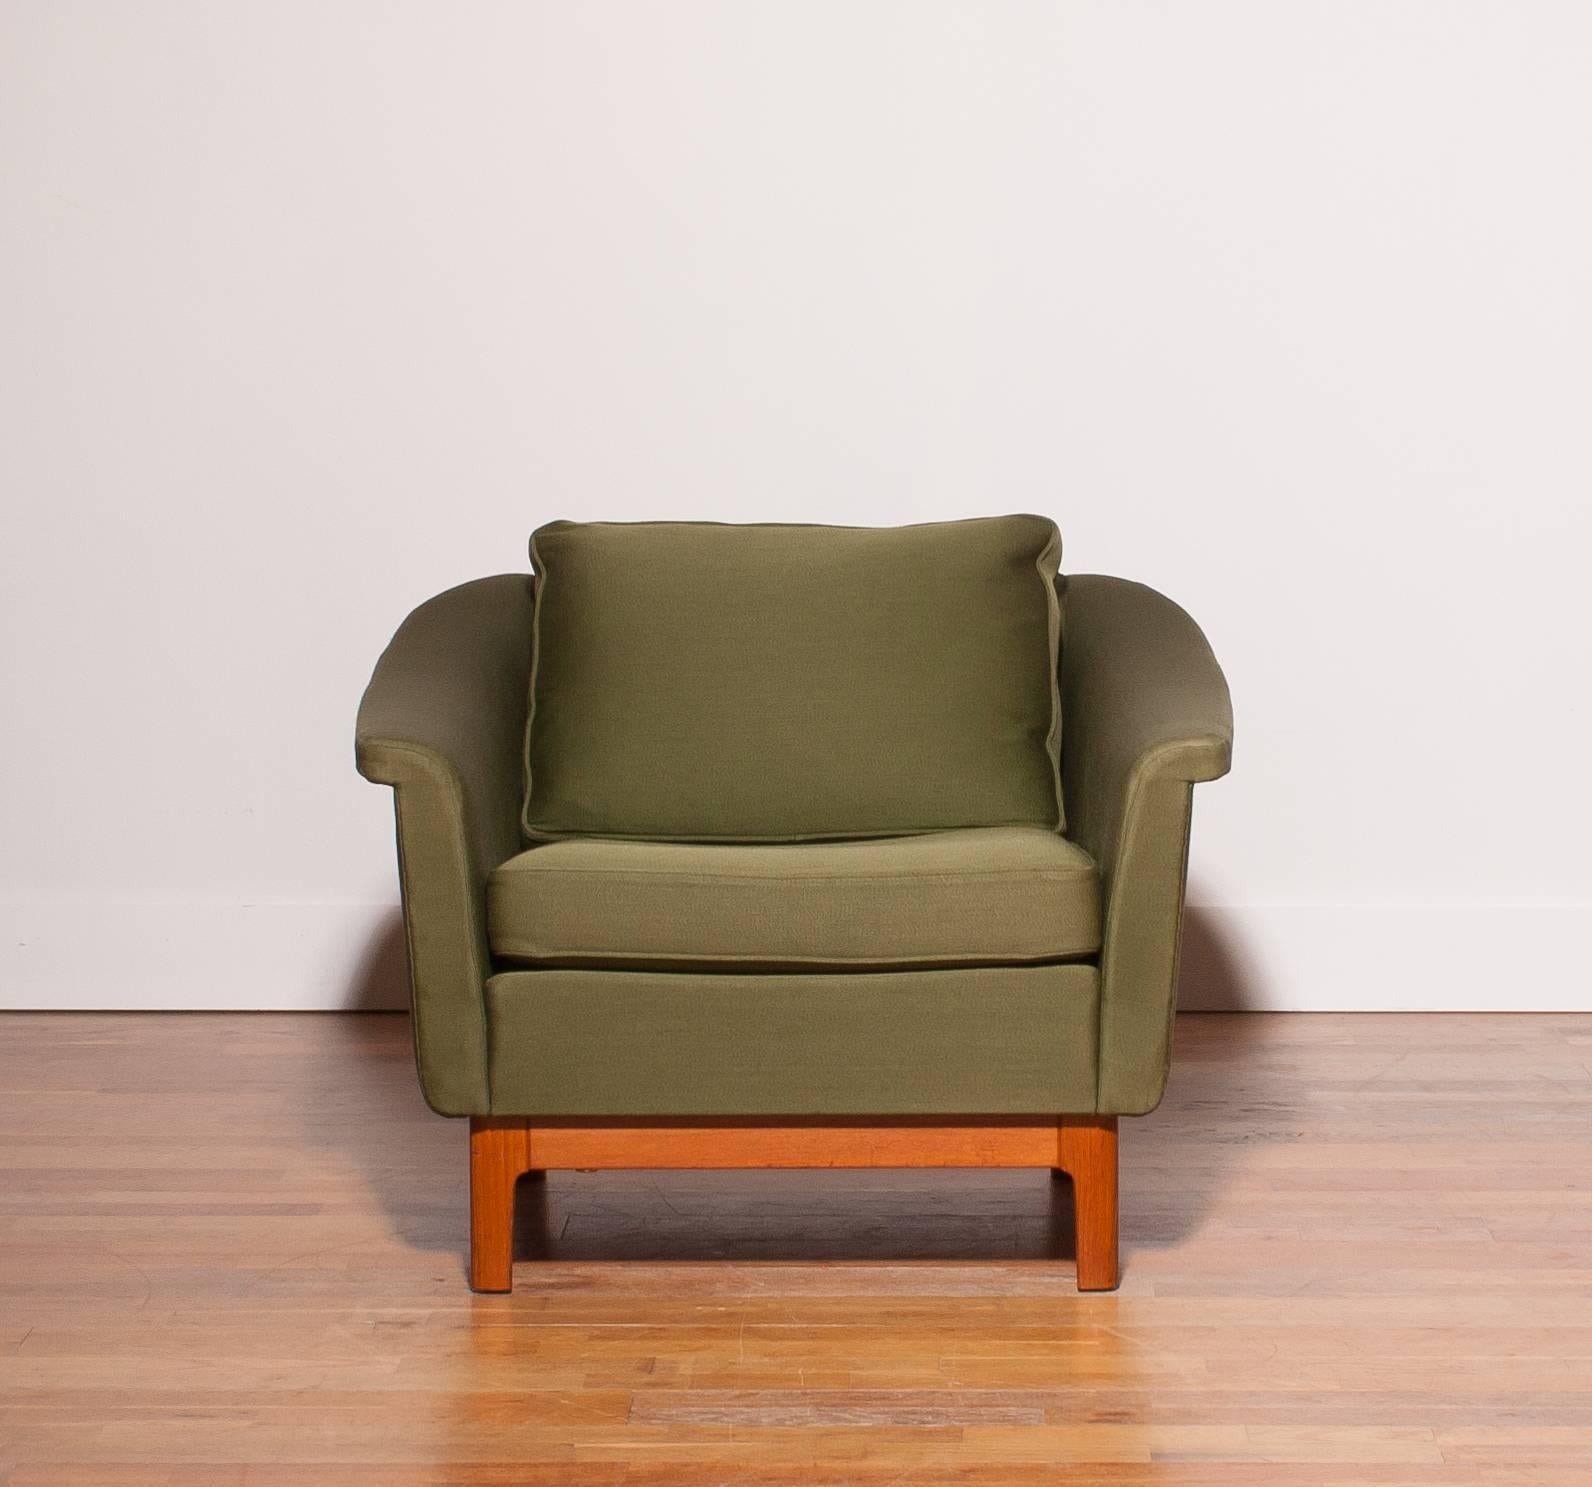 1960s, Green Lounge Chair by Folke Ohlsson for DUX. 1